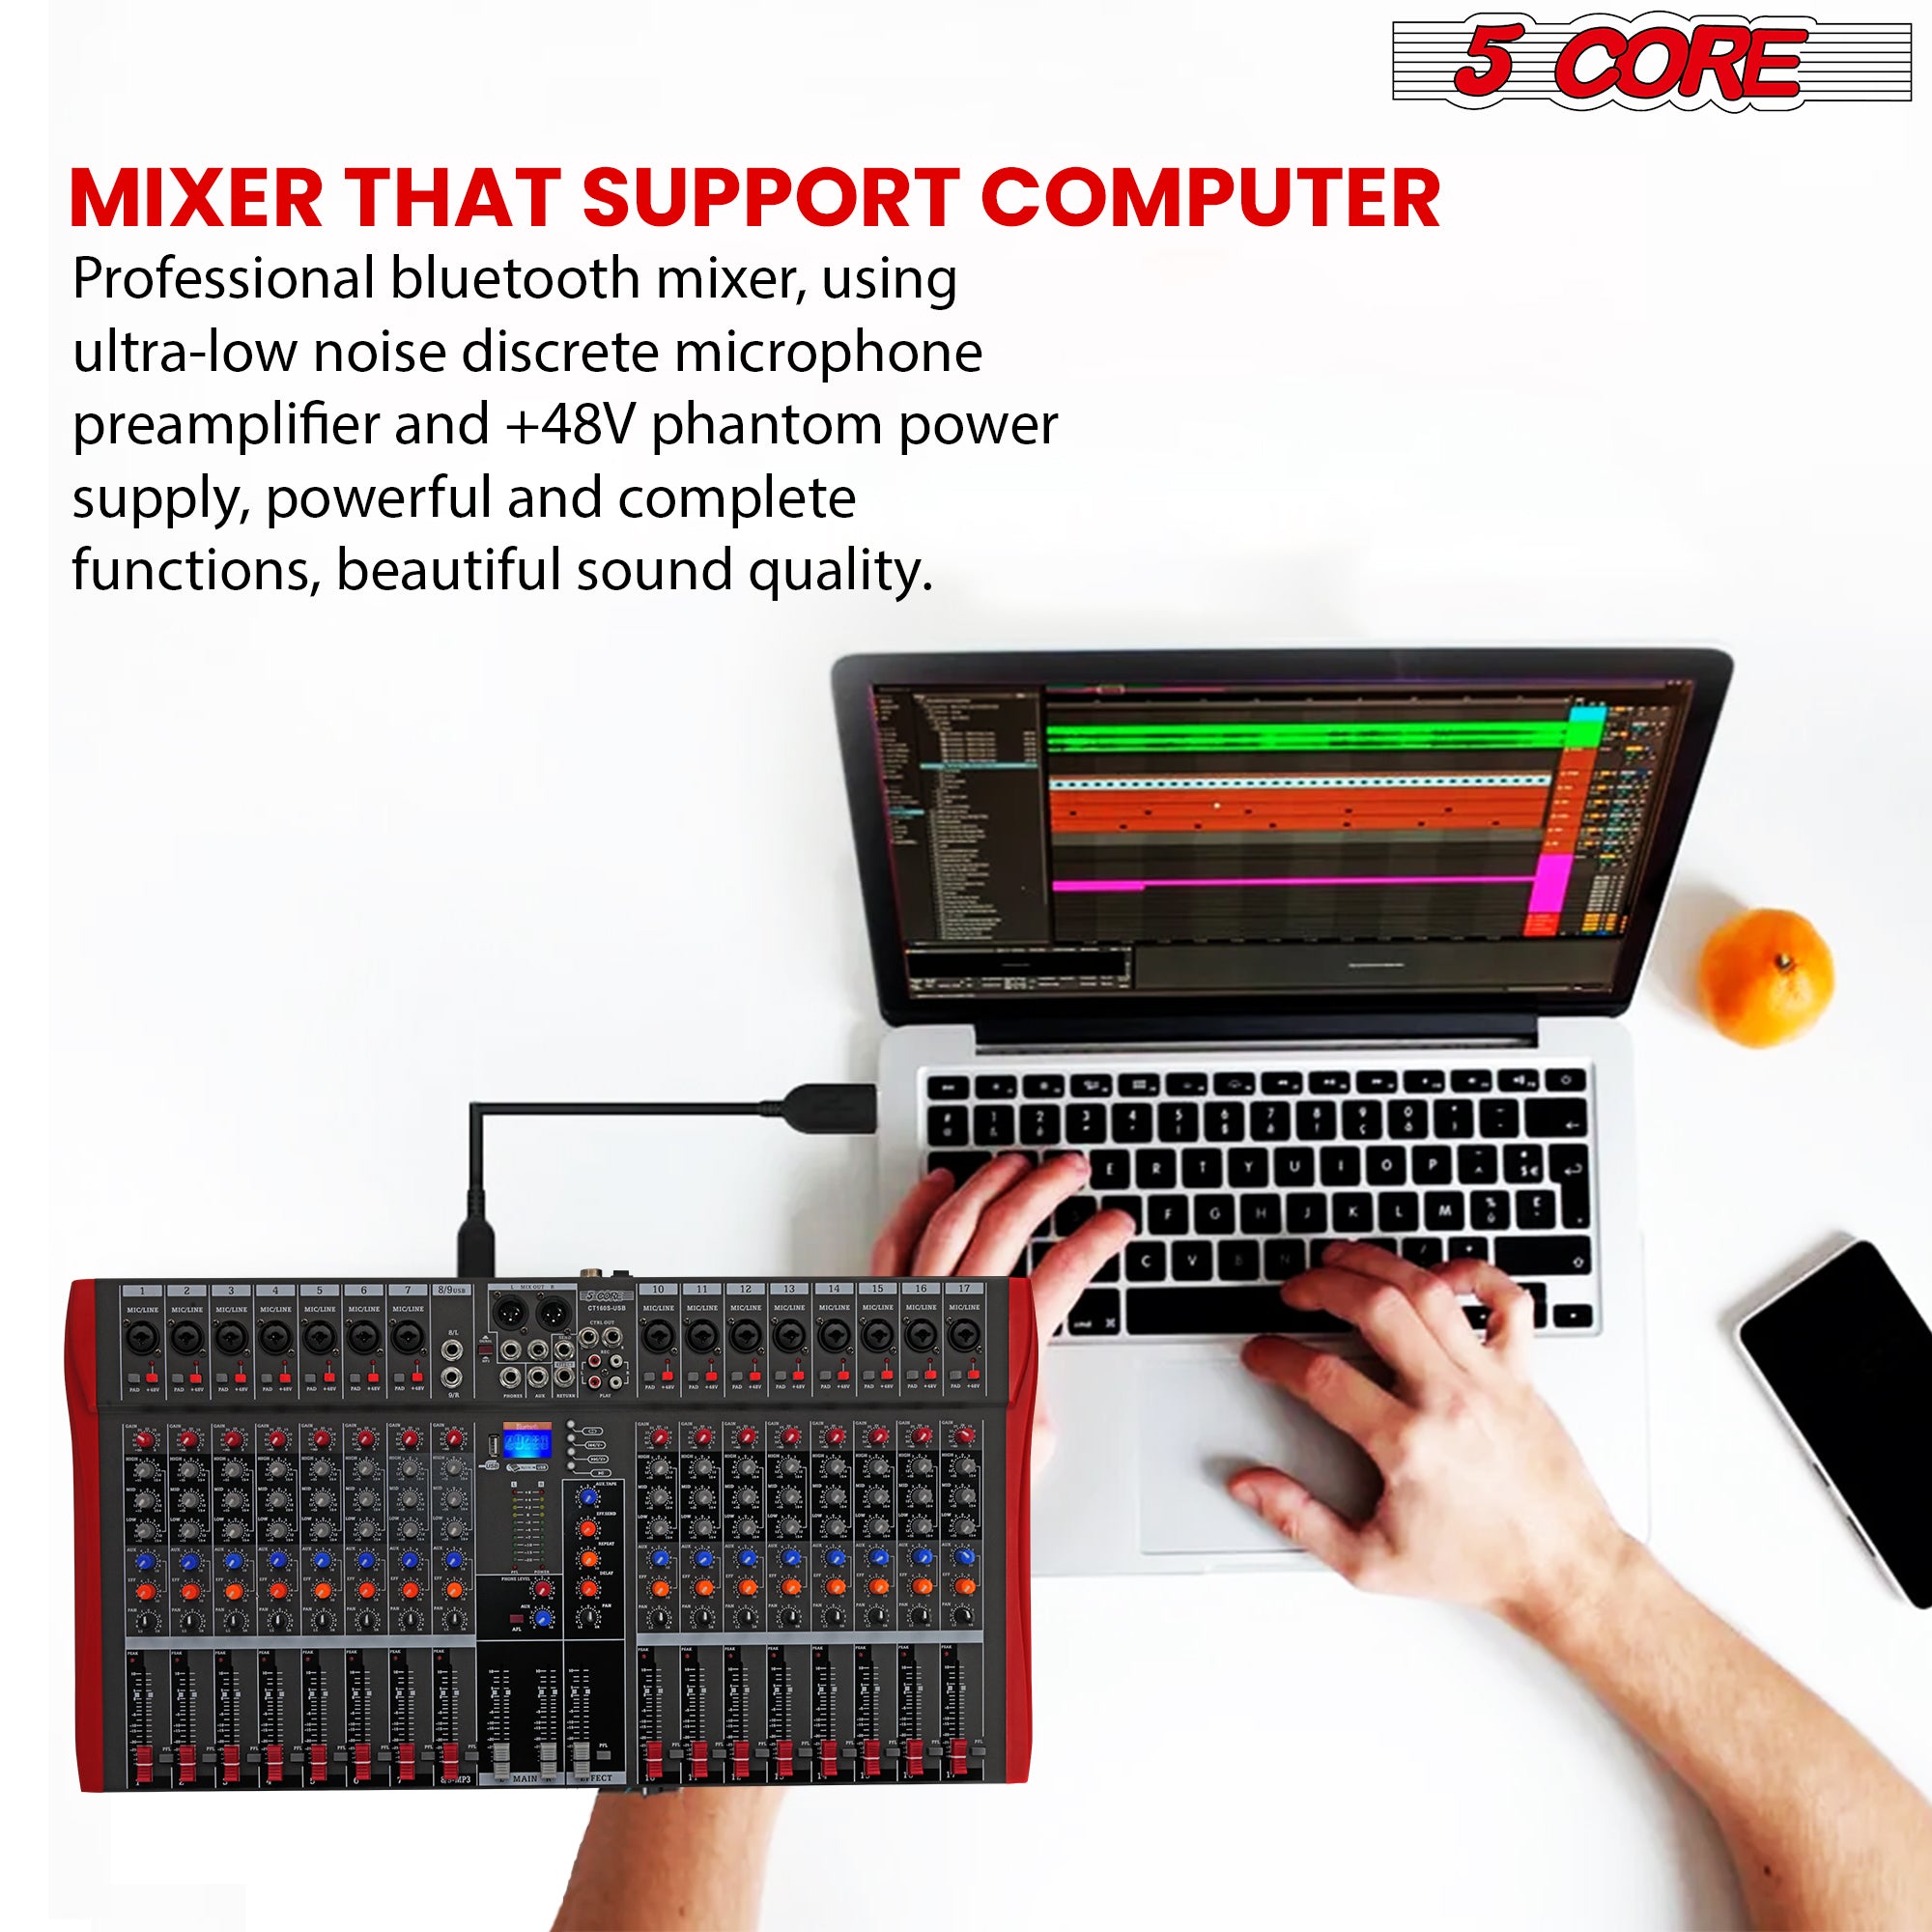 Mixer that support computer.